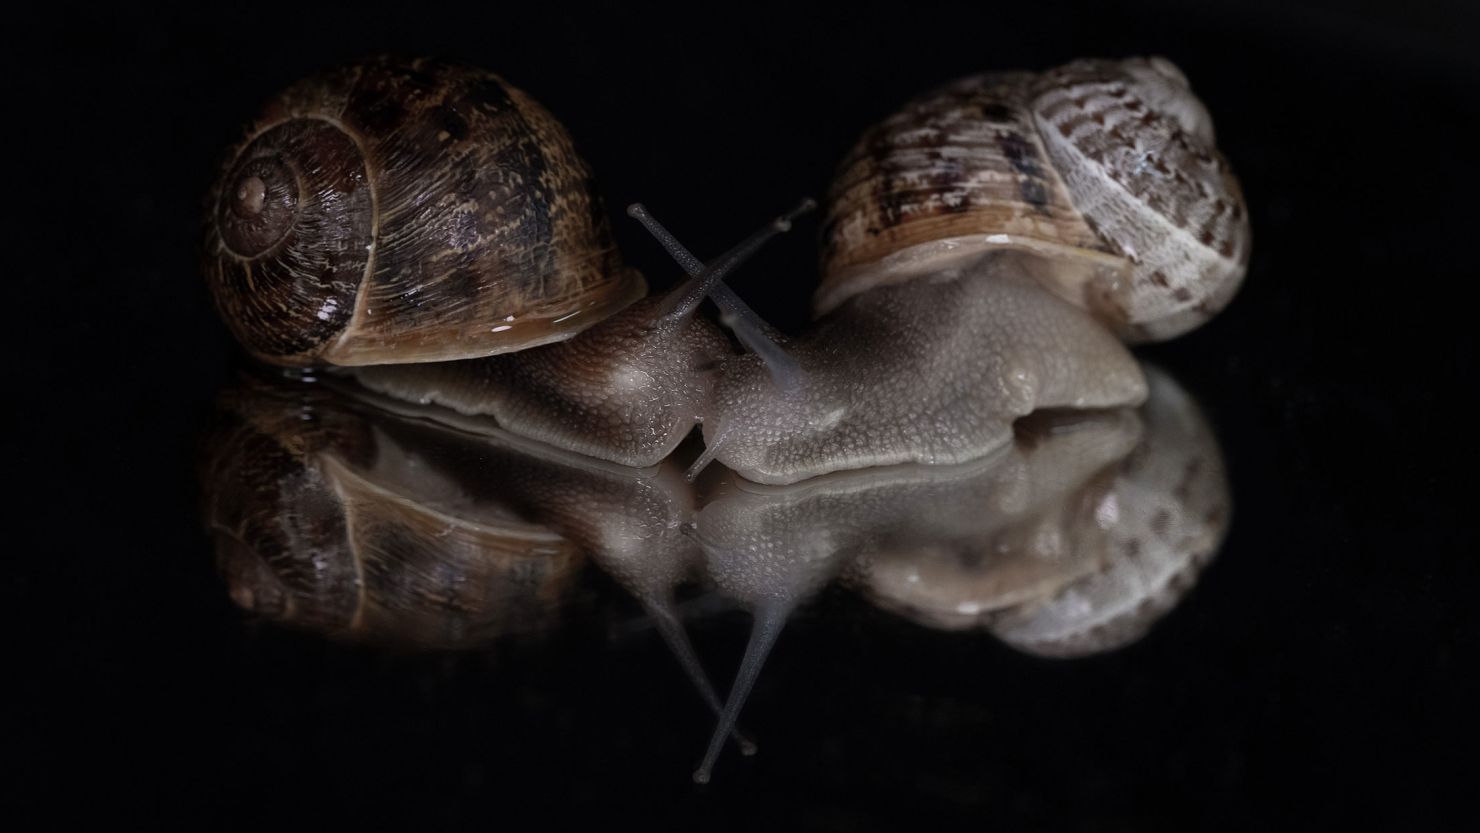 A dextral (righty) snail, whose shell coils to the right, sits on the right while its counterpart, a sinistral (lefty) snail, is on the left.